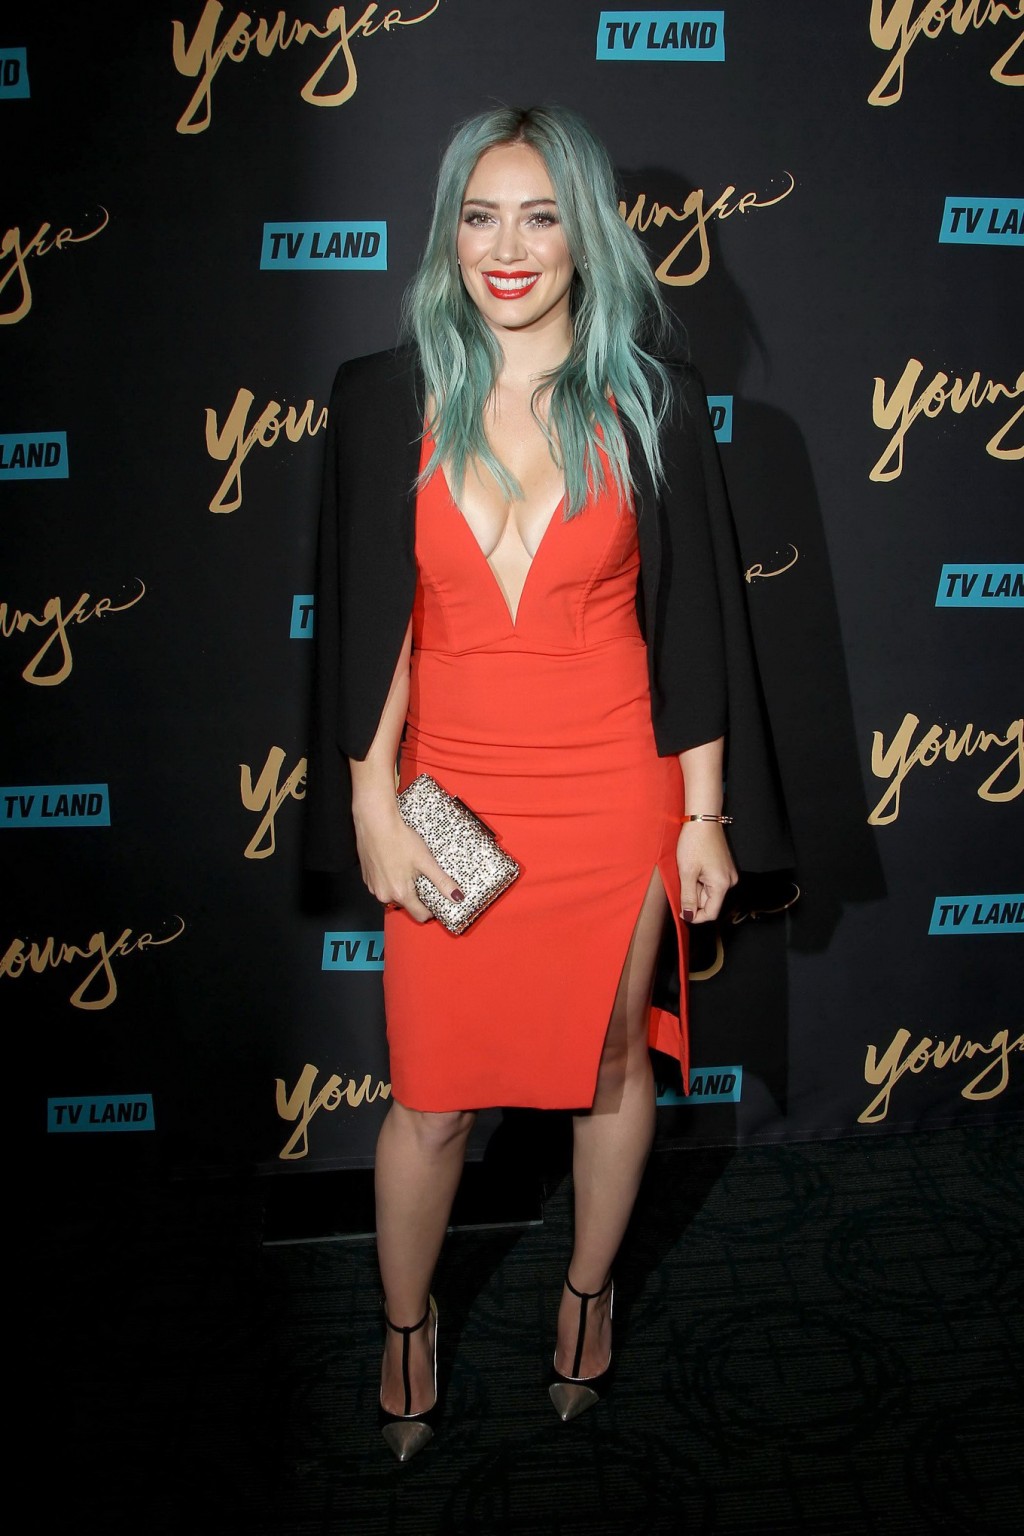 Hilary Duff showing huge cleavage braless in short red dress at the Younger prem #75168359